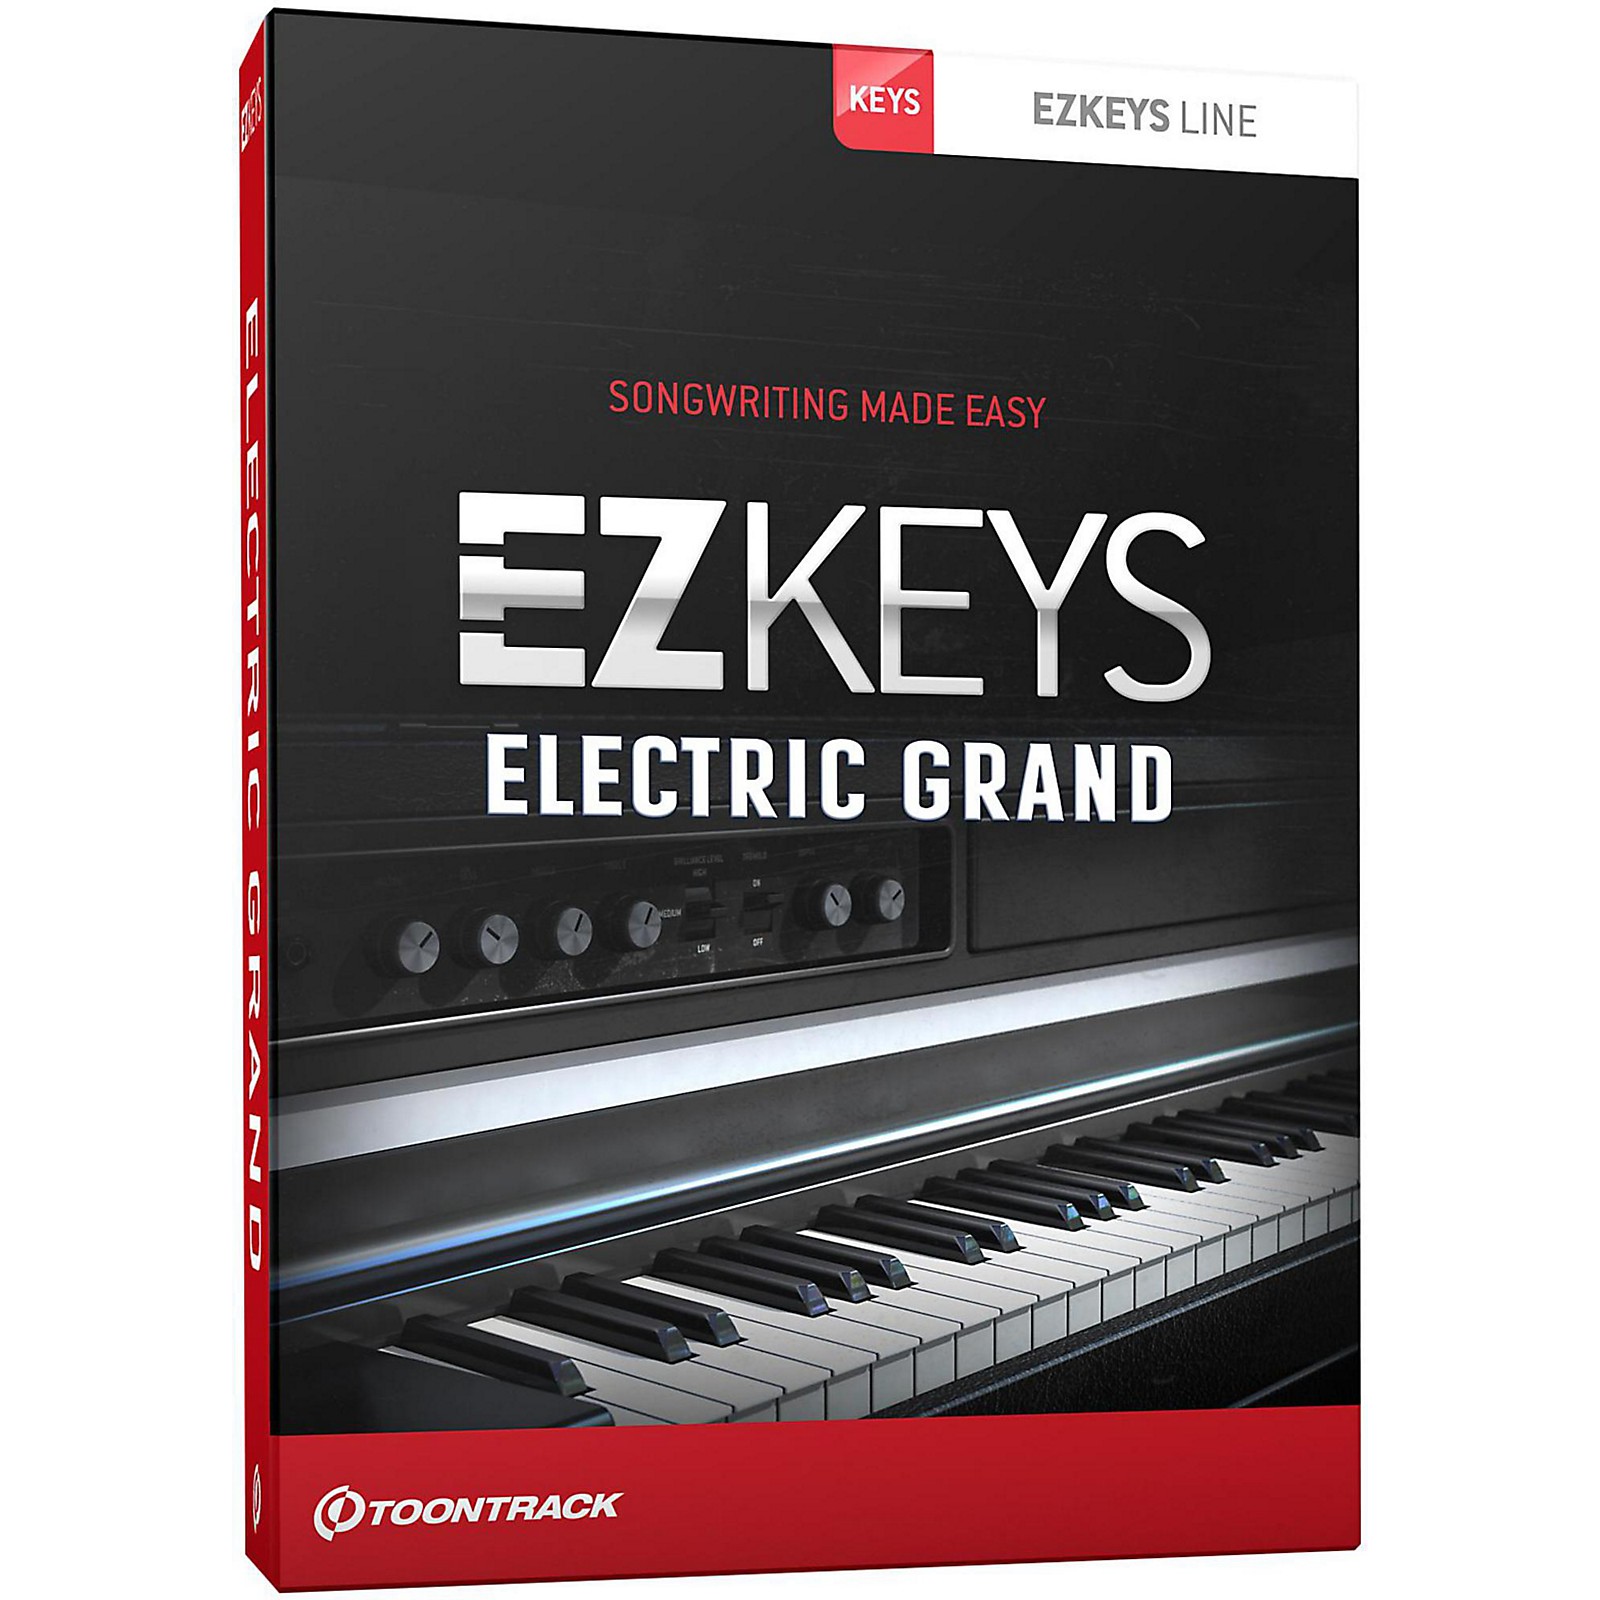 Toontrack Ezkeys Electric Grand Musician S Friend - roblox piano keyboard v11 sheets